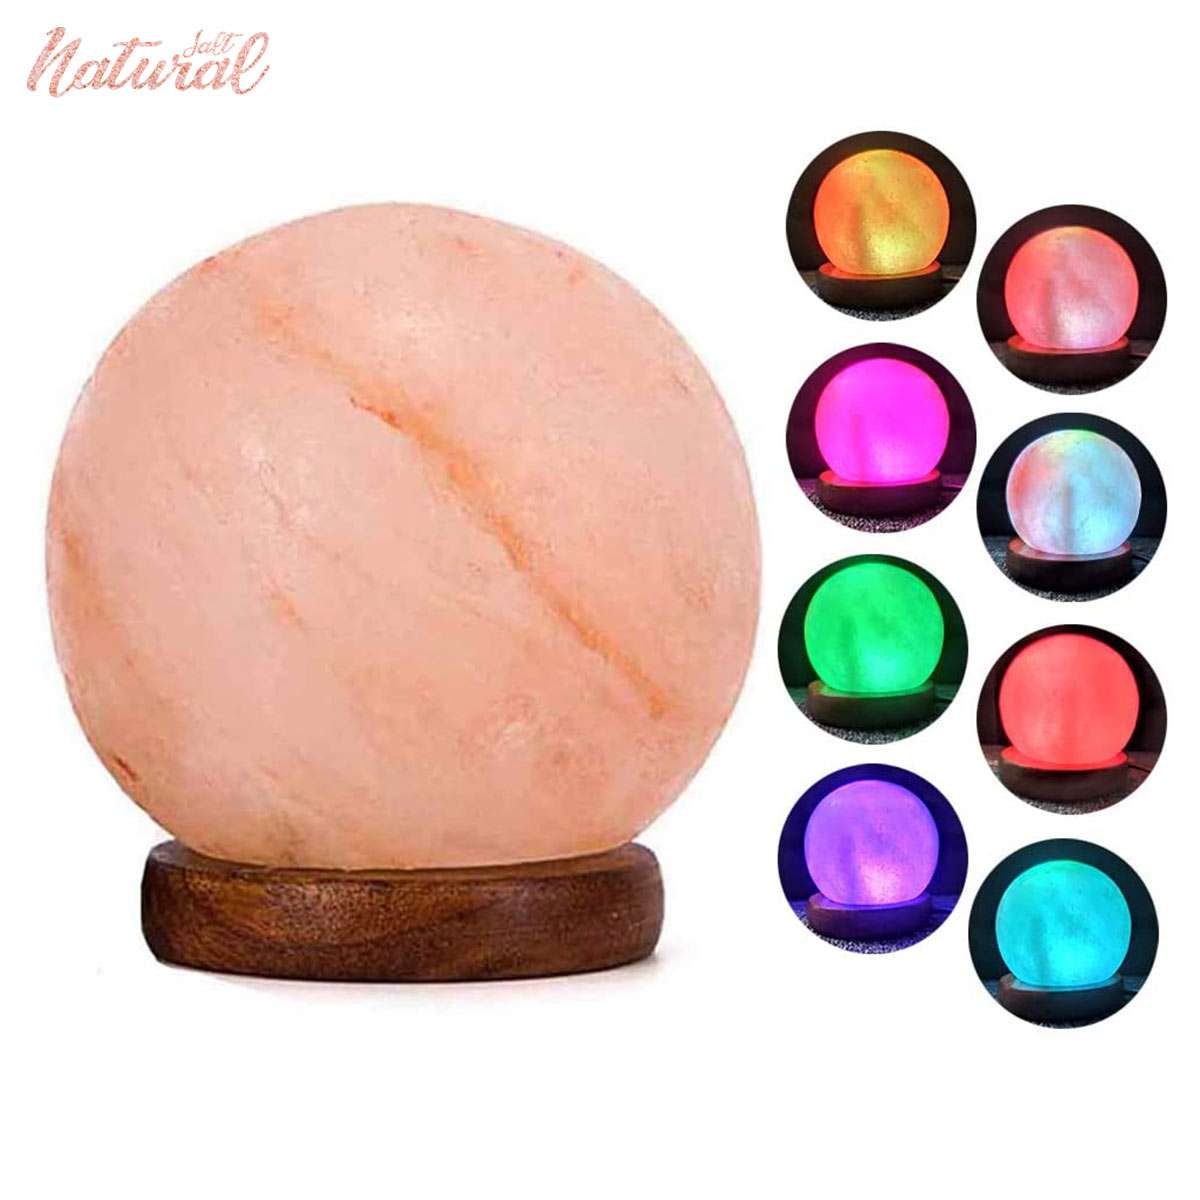 Multi-Colour Globe Himalayan Pink Salt Mini USB LAMP for Laptop Desk or Office Hand Crafted Direct from Our Mine in The Himilayas 